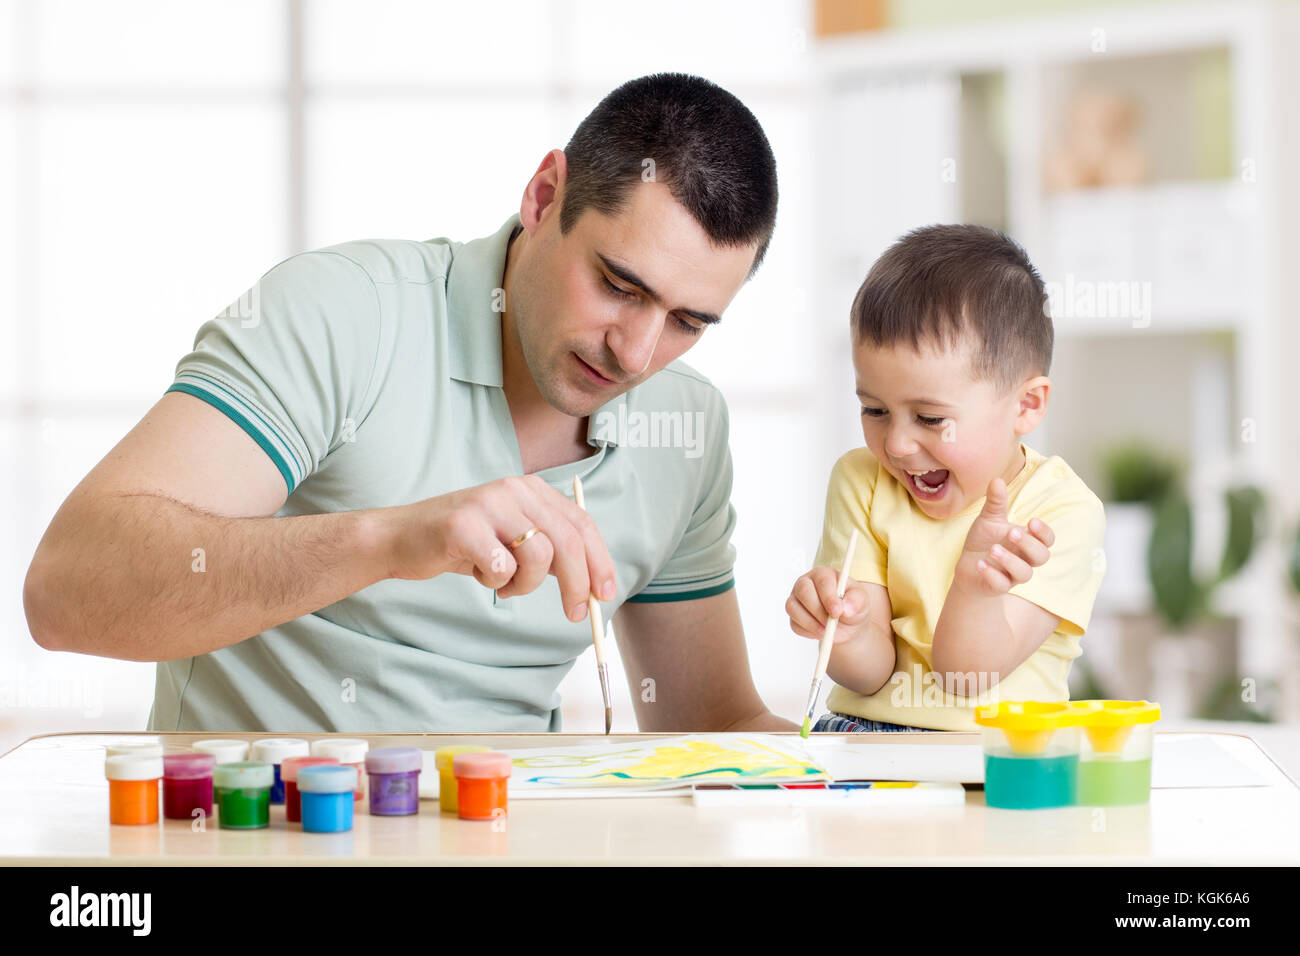 Father and child little boy of three years having fun painting at home Stock Photo